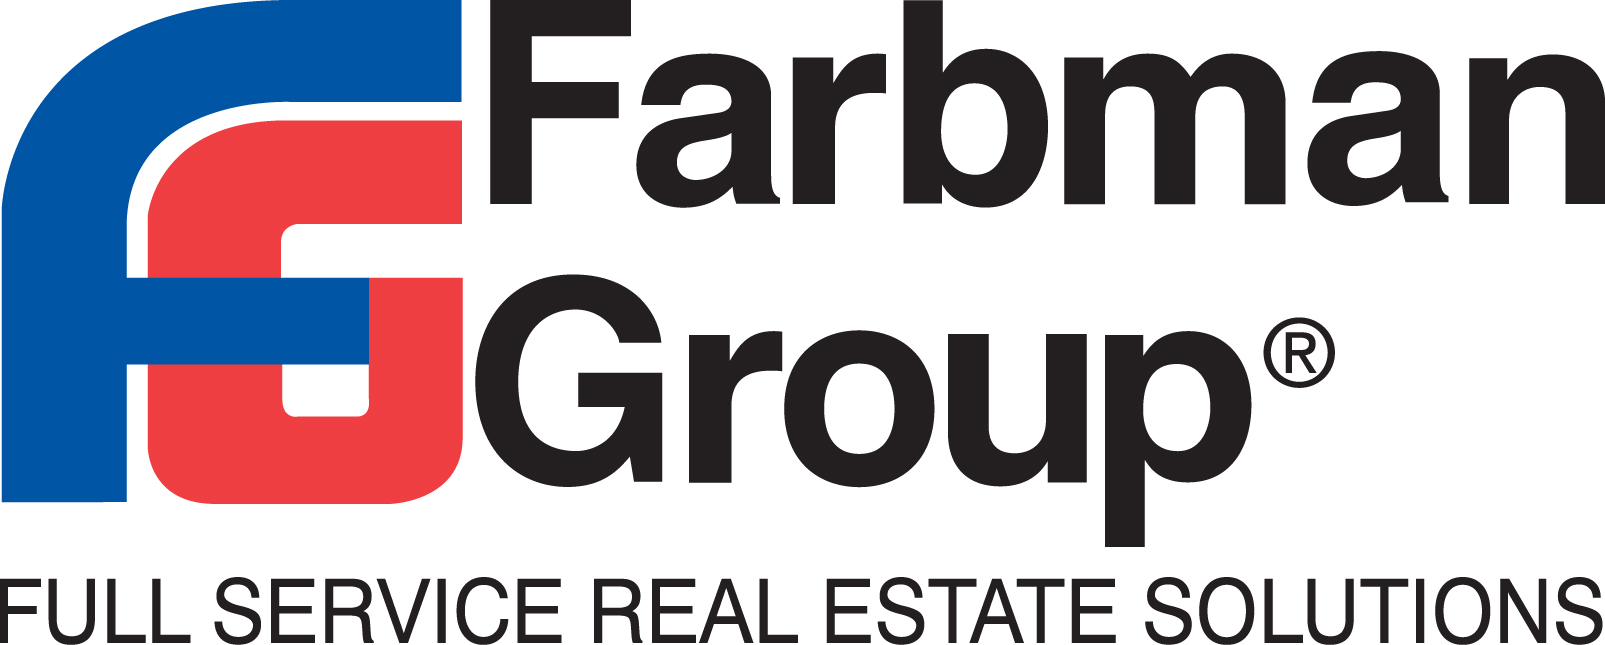 Contact Farbman Group today!